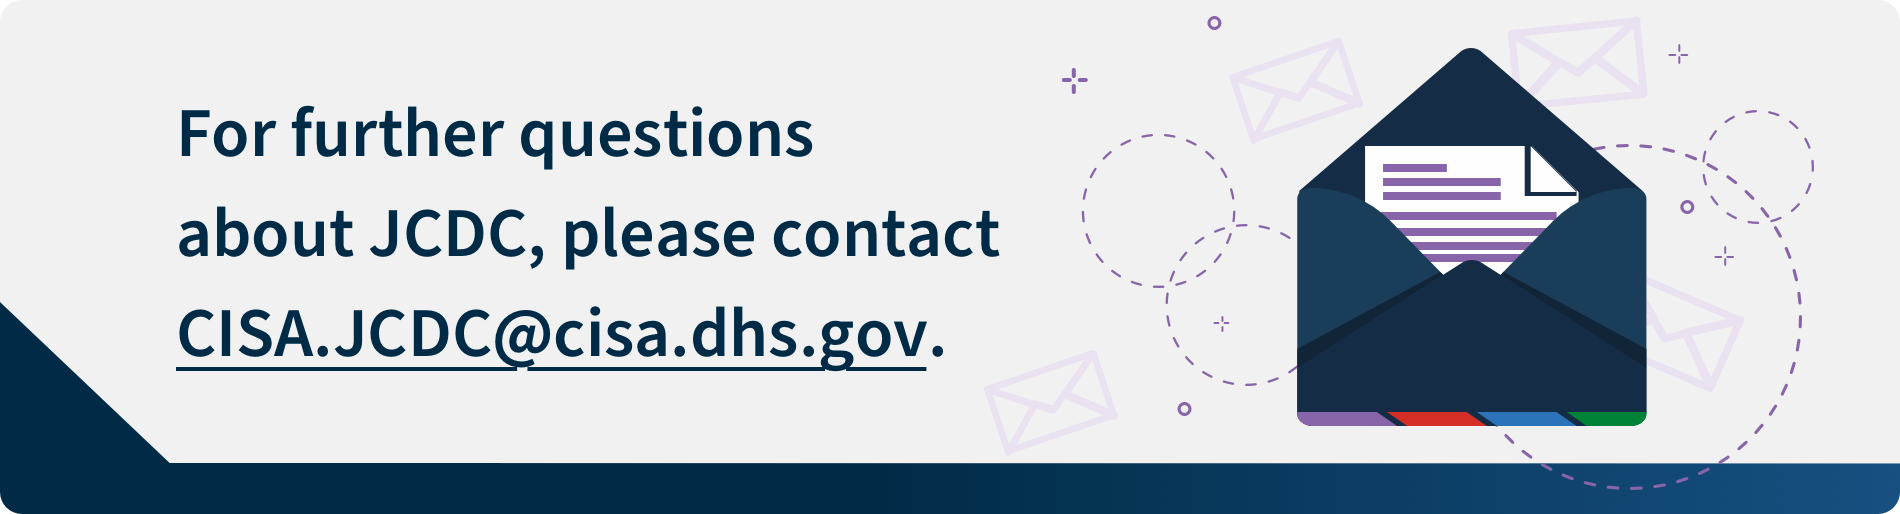 For further questions about JCDC, please contact CISA.JCDC@cisa.dhs.gov.